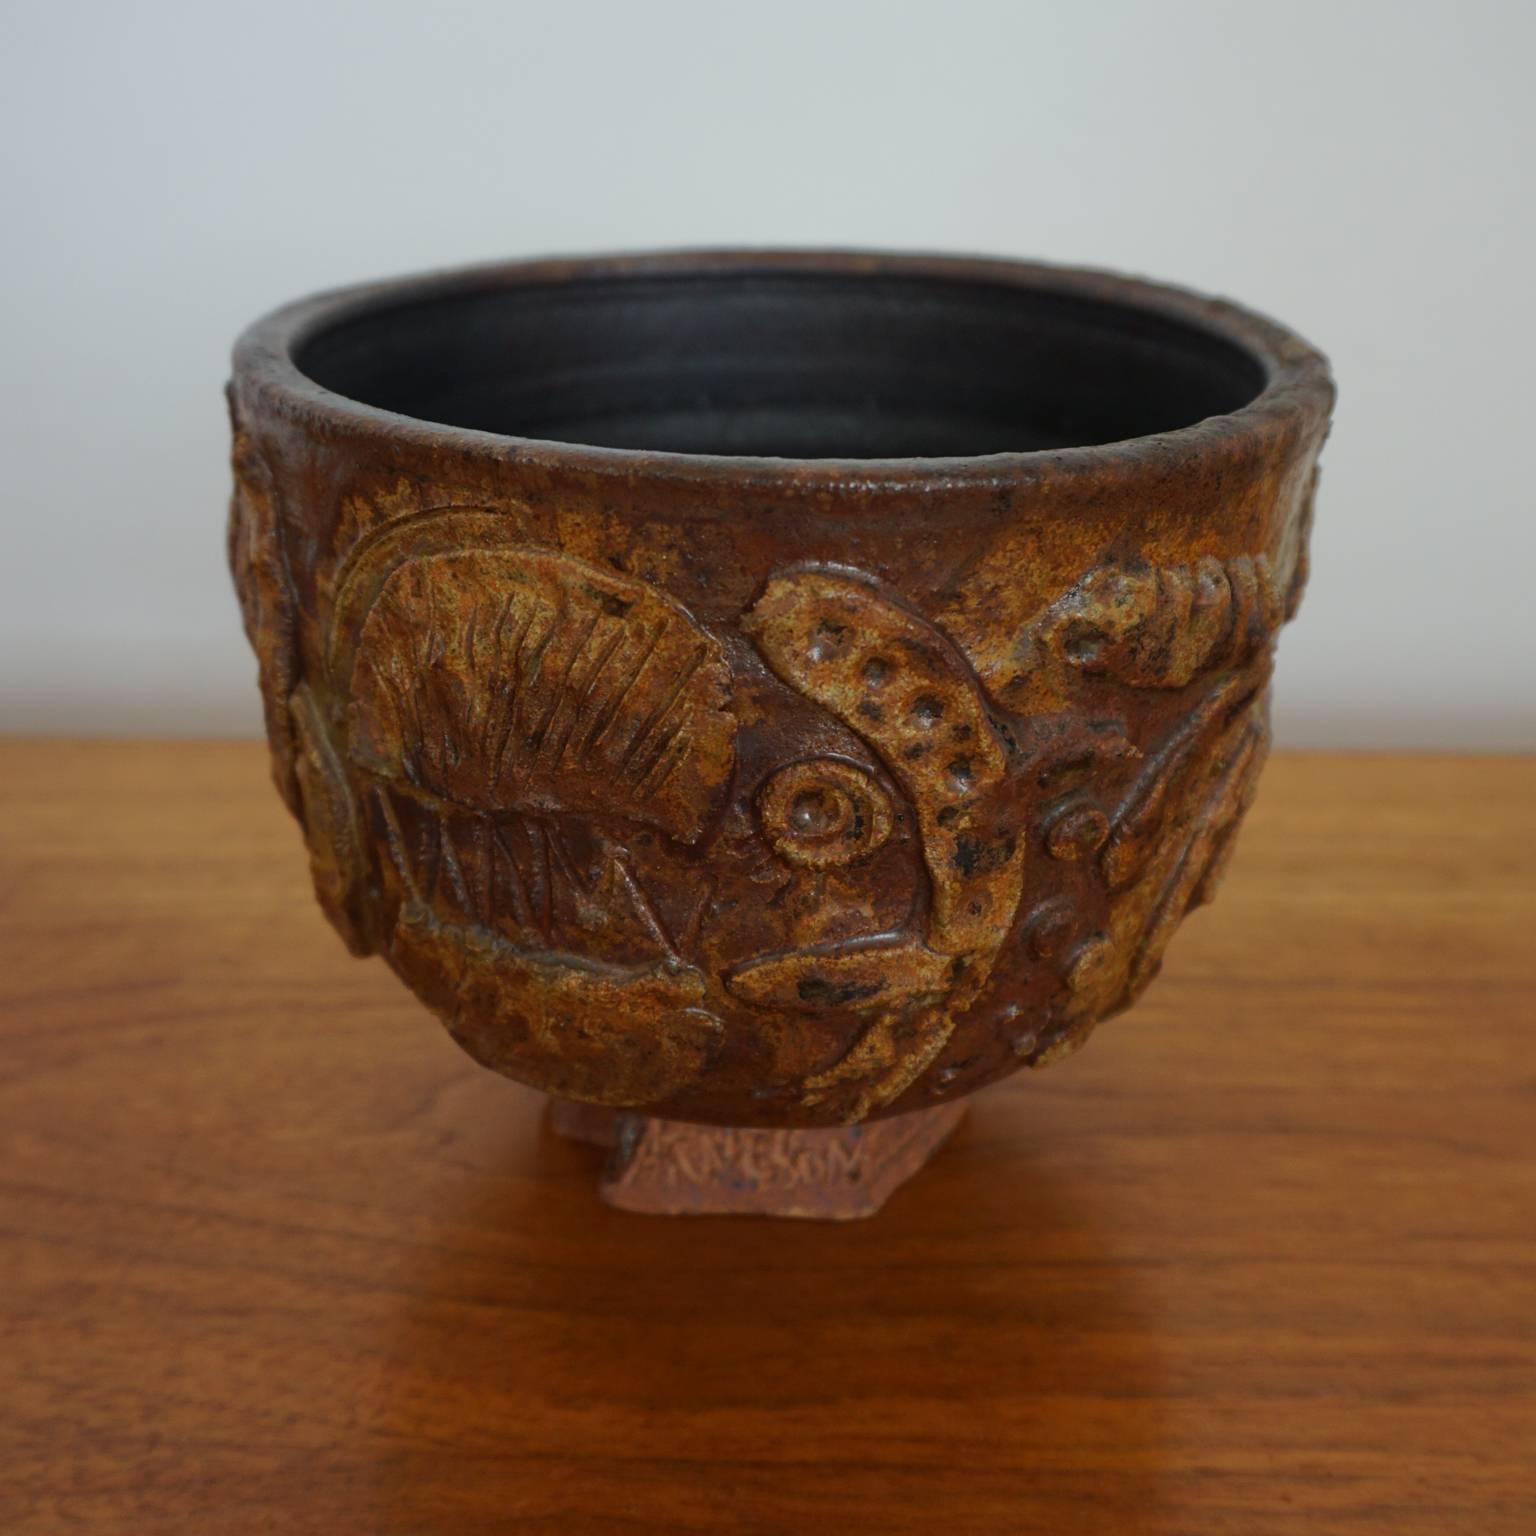 Expressionist 1960s Ceramic Bowl by Robert Arneson